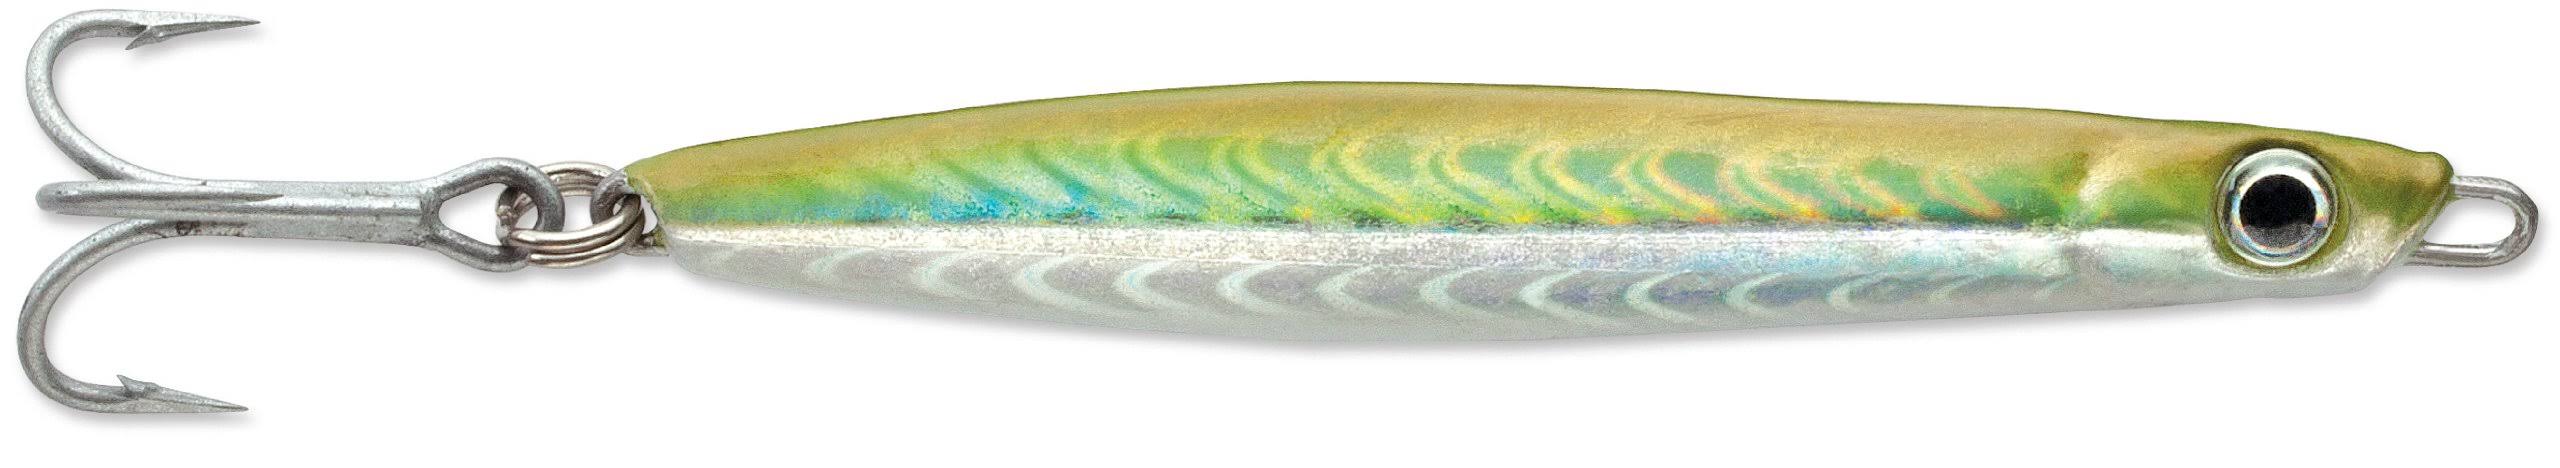 Williamson Gomoku Jig 60 Fishing Lure | General | Free Shipping On All orders | 30 Day Money Back Guarantee | Delivery Guaranteed